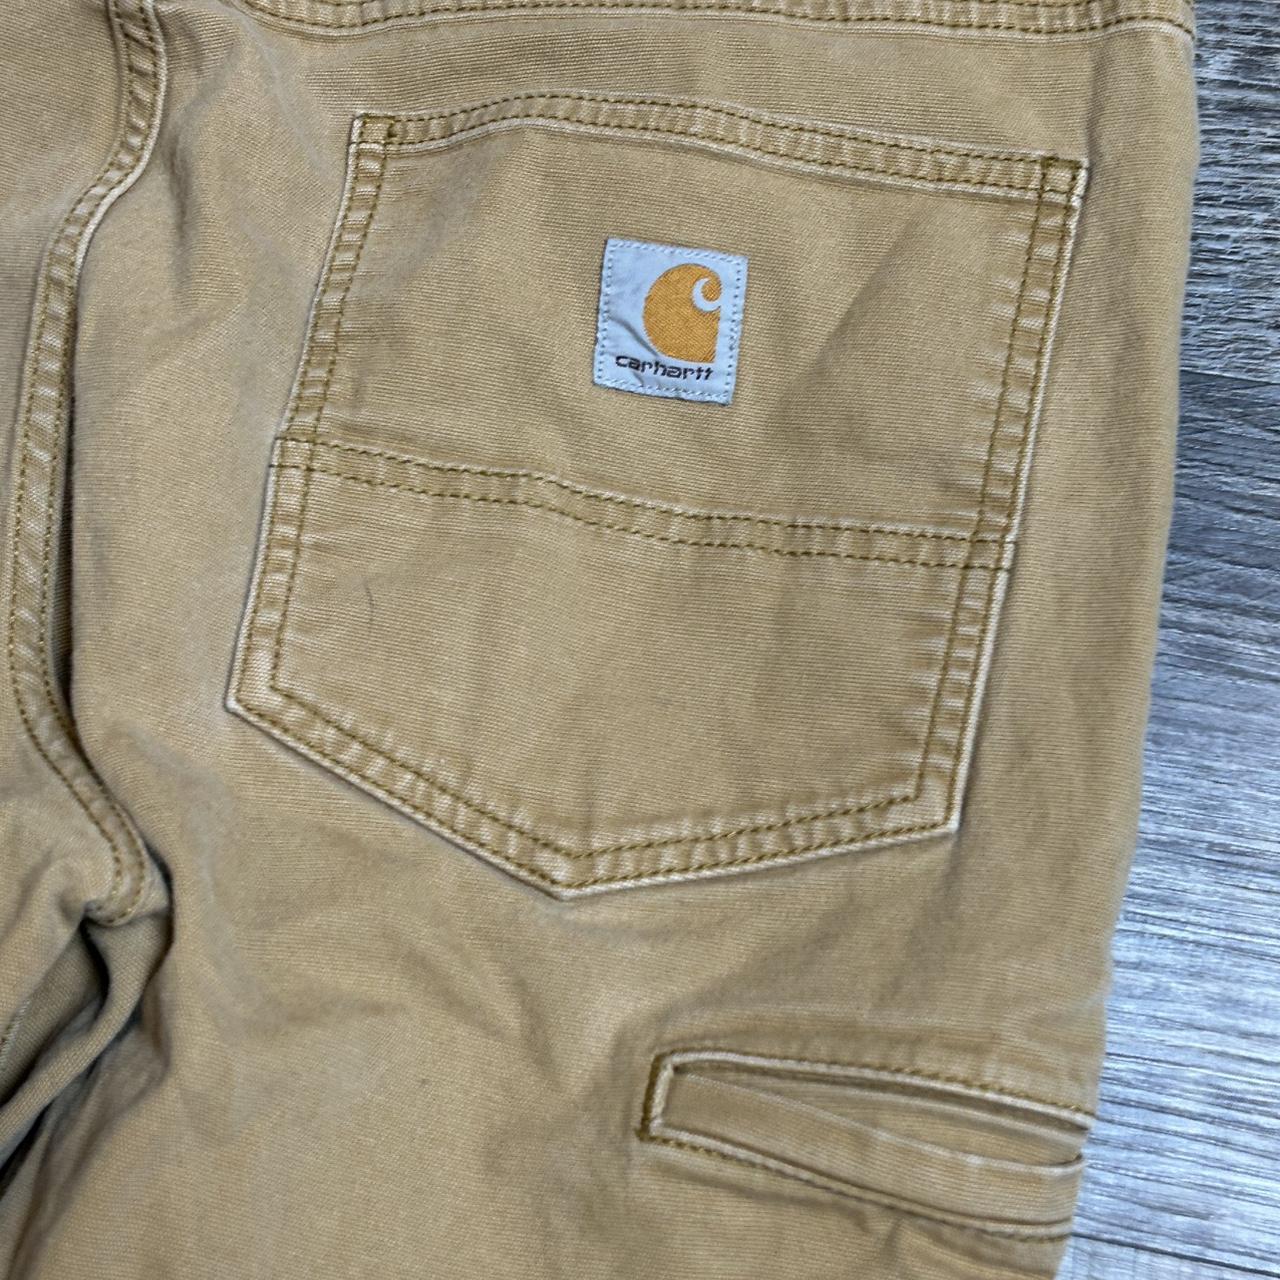 Carhartt relaxed fit pants size 38x30 - 1-2 day... - Depop